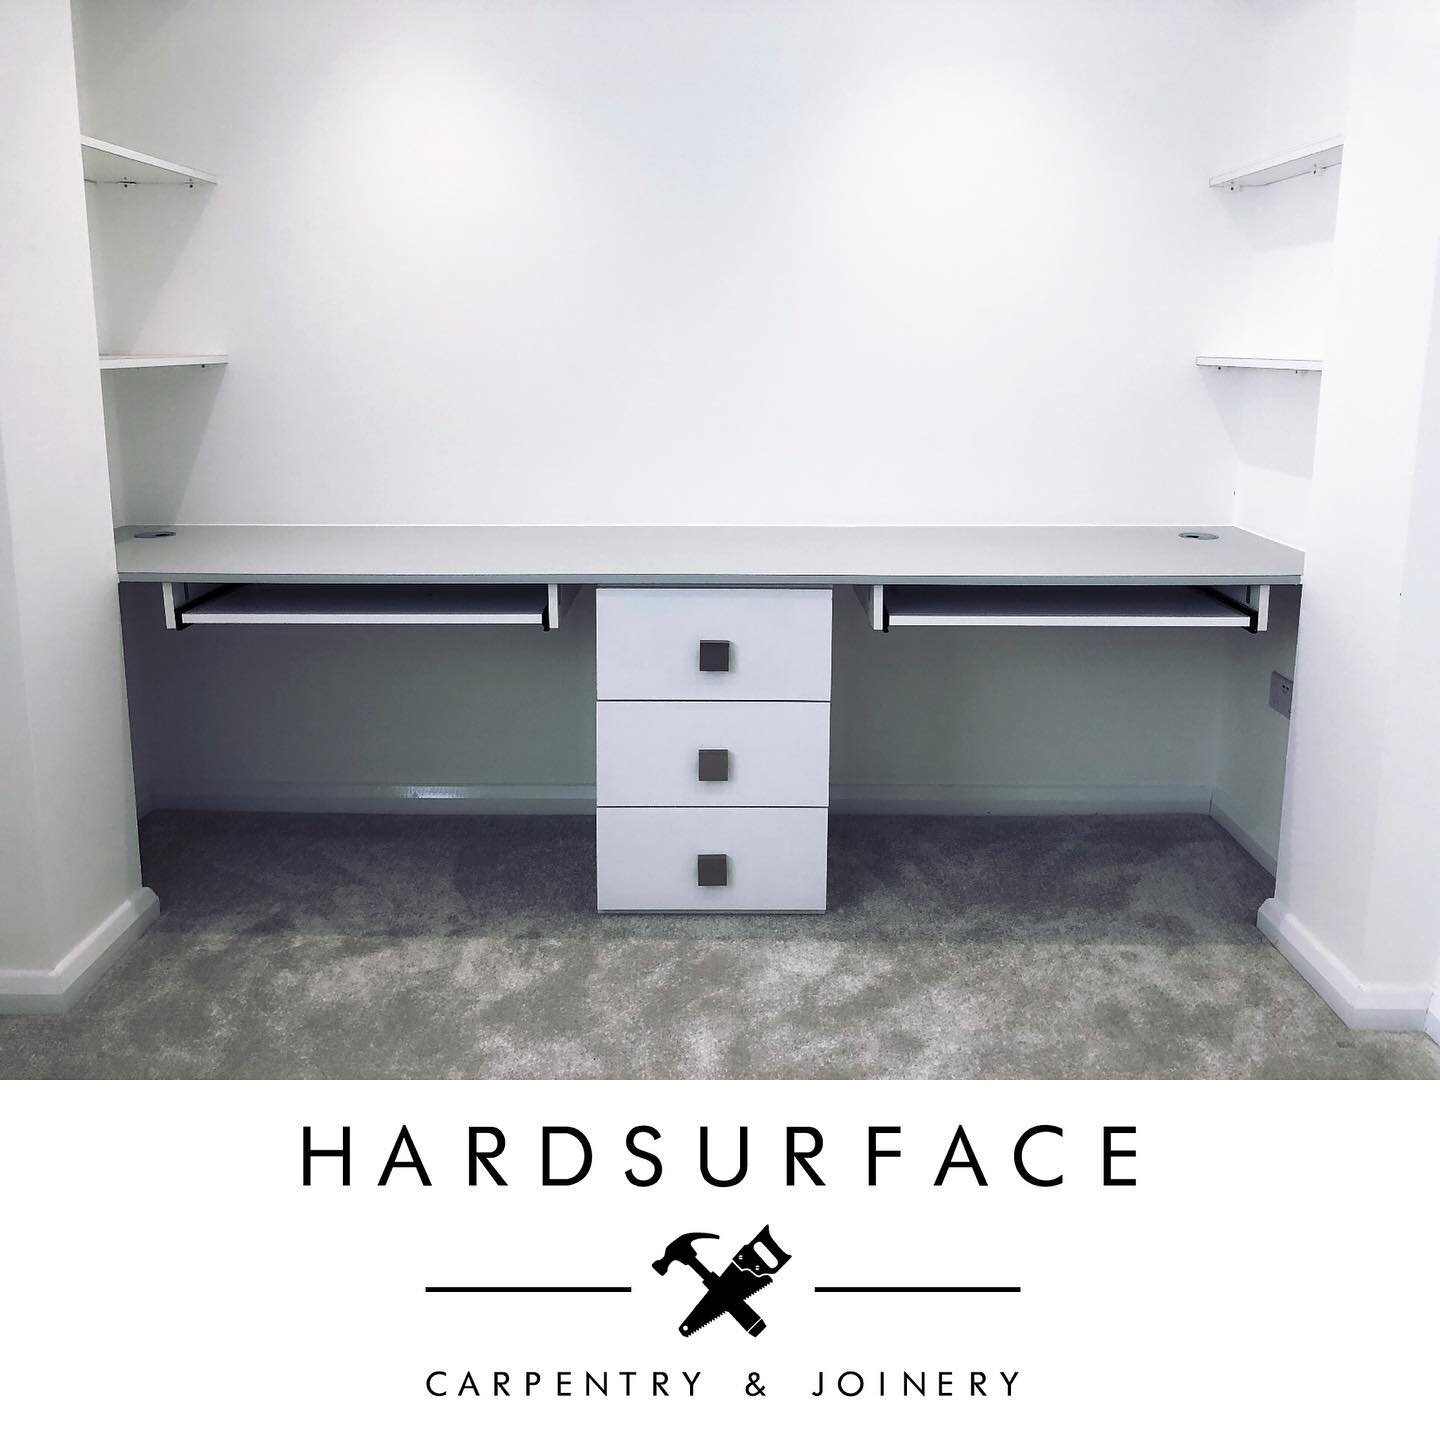 Still working from home? Update your work space to make working from home more comfortable and enjoyable. We can create bespoke office furniture and storage space to suit your needs #hardsurface #office #workingfromhome #joinery